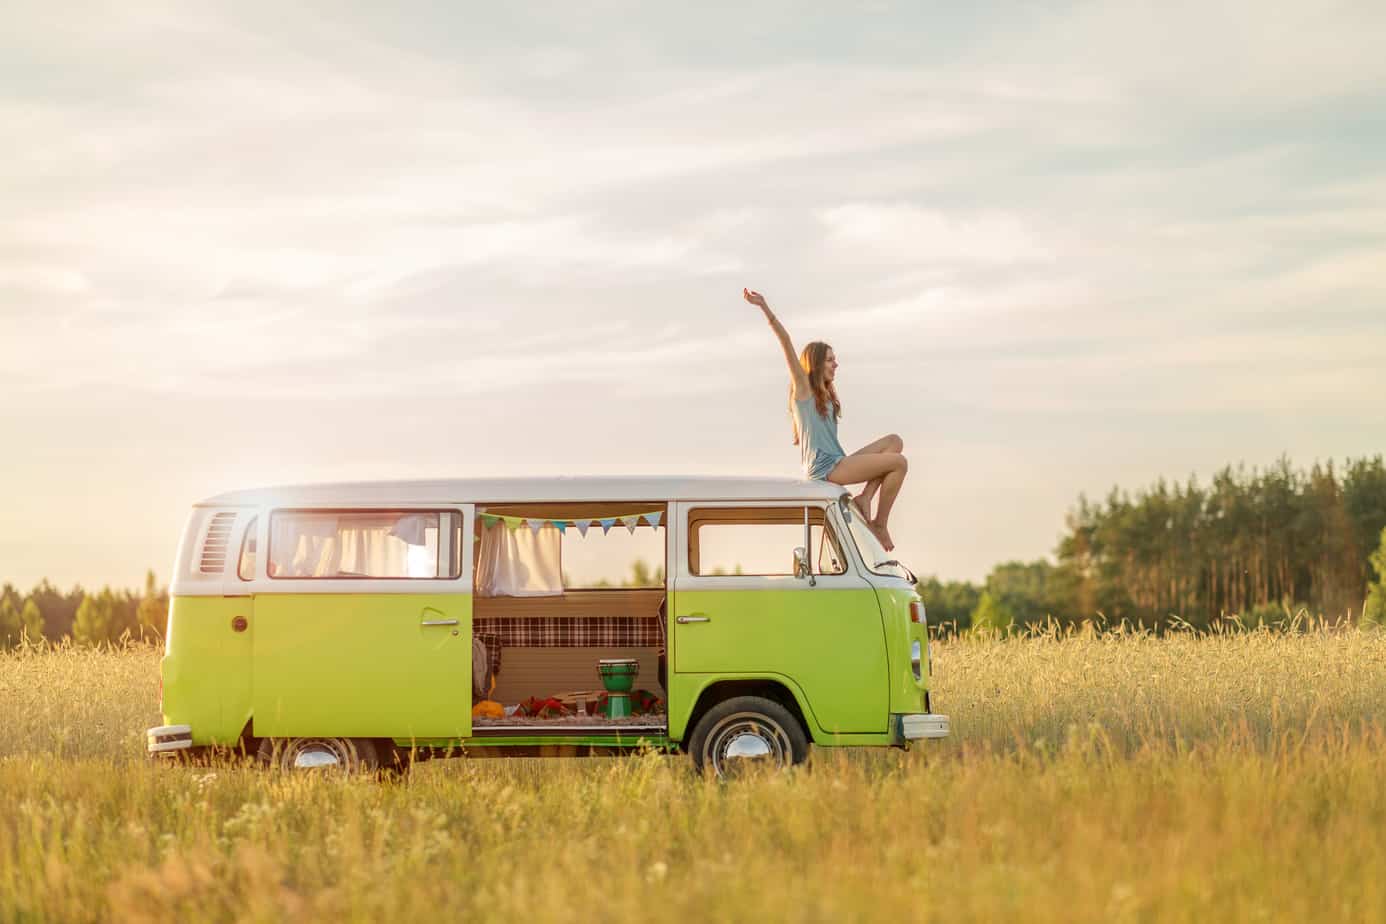 A girl sits on top of a green van with the toor open in the middle of a field.